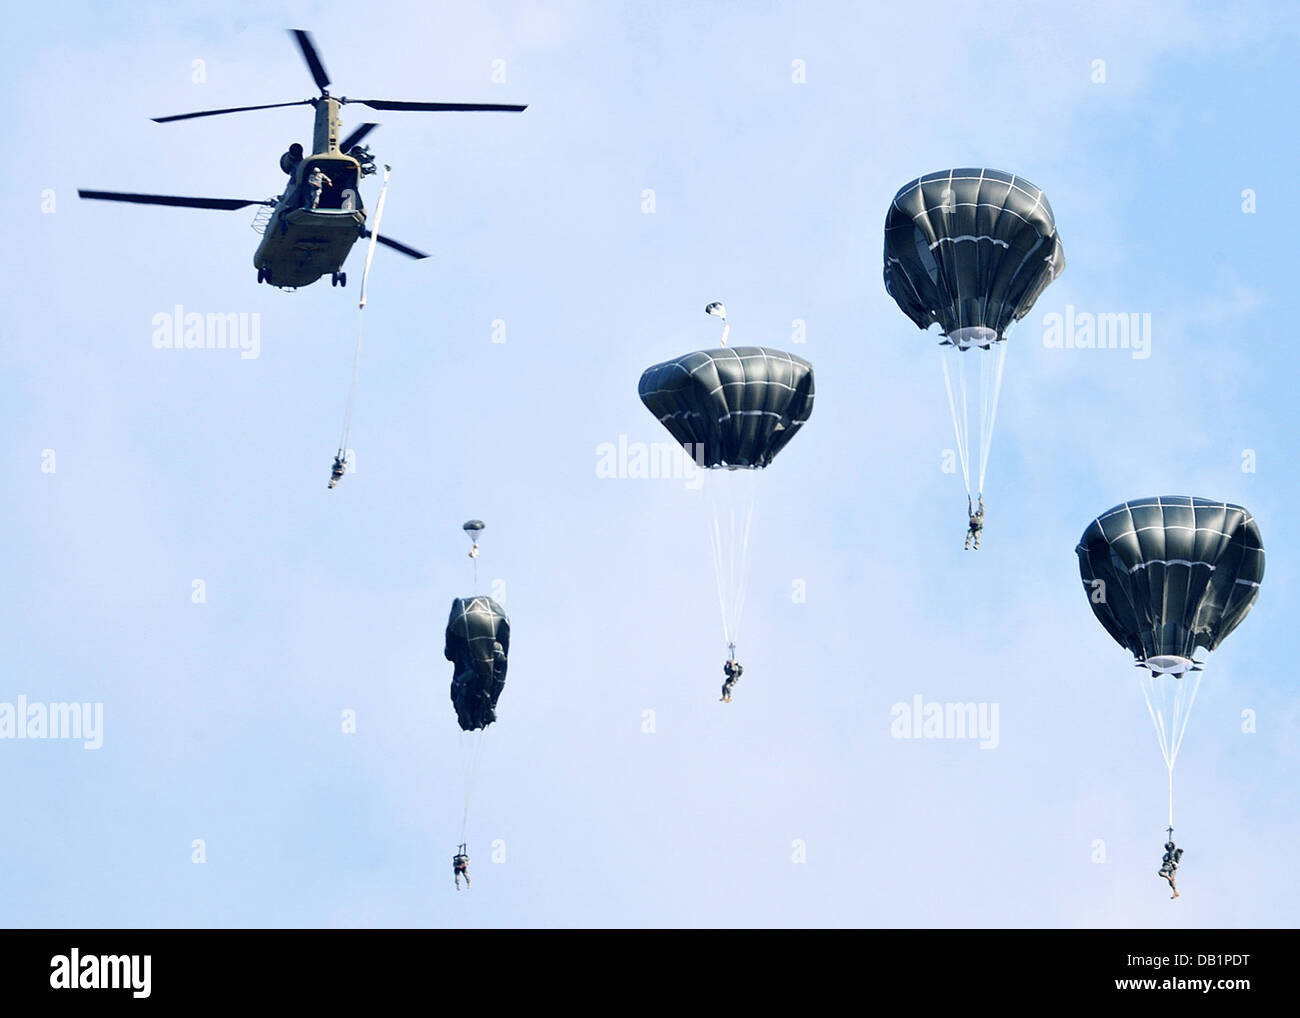 Paratroopers from the 173rd Airborne Brigade Combat Team participated in a joint parachute training jump with CH-47 Chinook aircraft from the 12th Combat Aviation Brigade here July 16. Also participating were Italian army paratroopers from the Folgore Par Stock Photo